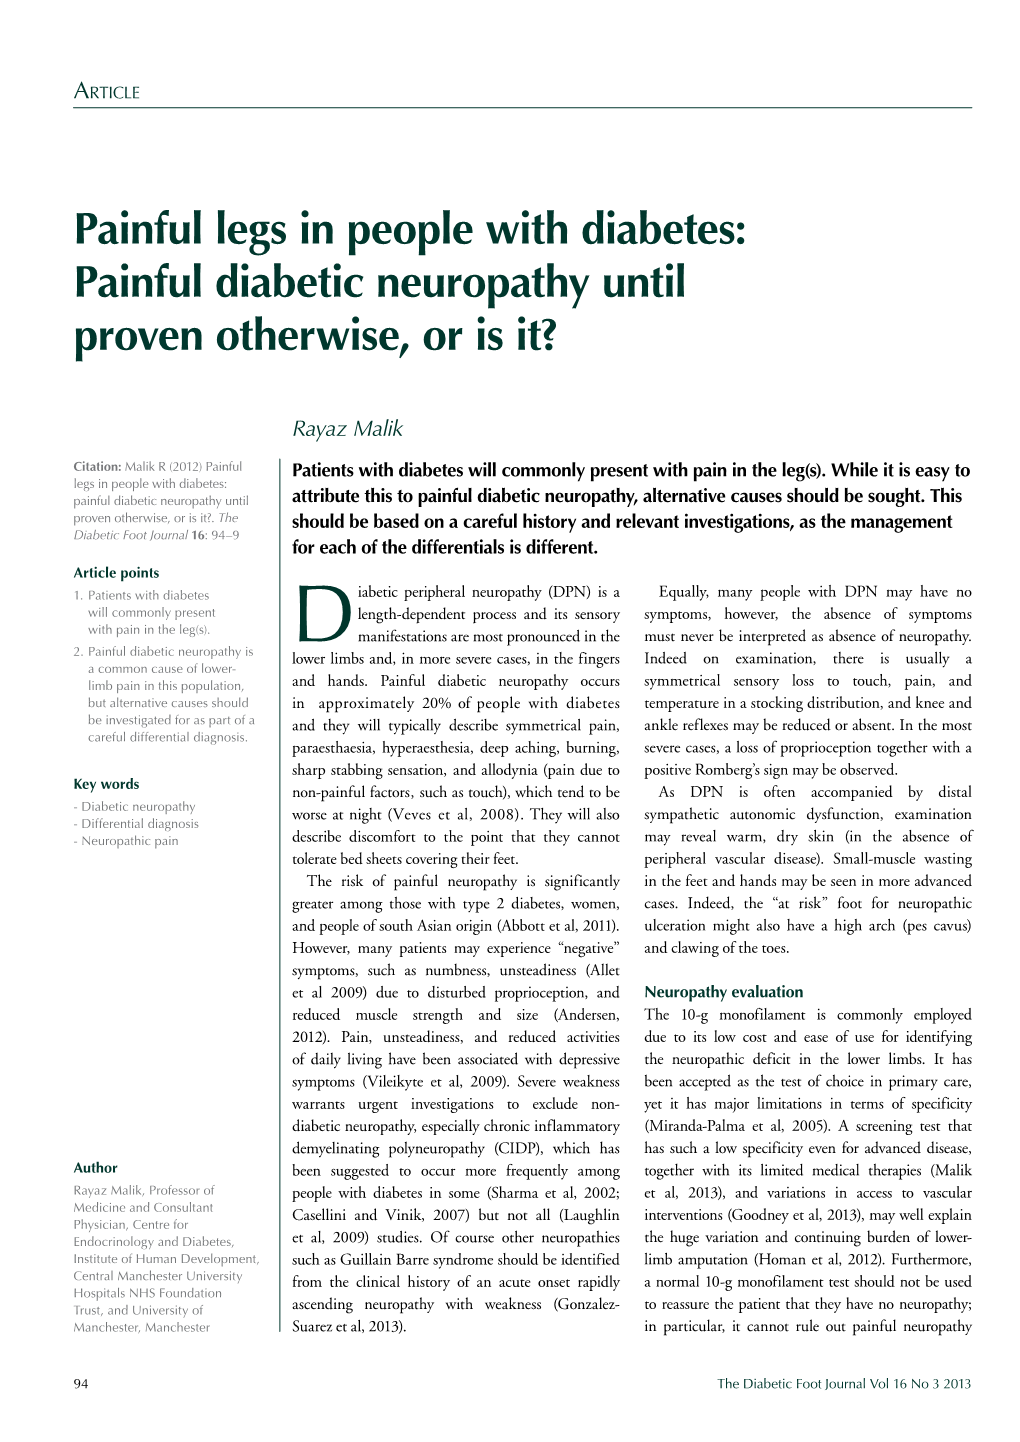 Painful Legs in People with Diabetes: Painful Diabetic Neuropathy Until Proven Otherwise, Or Is It?